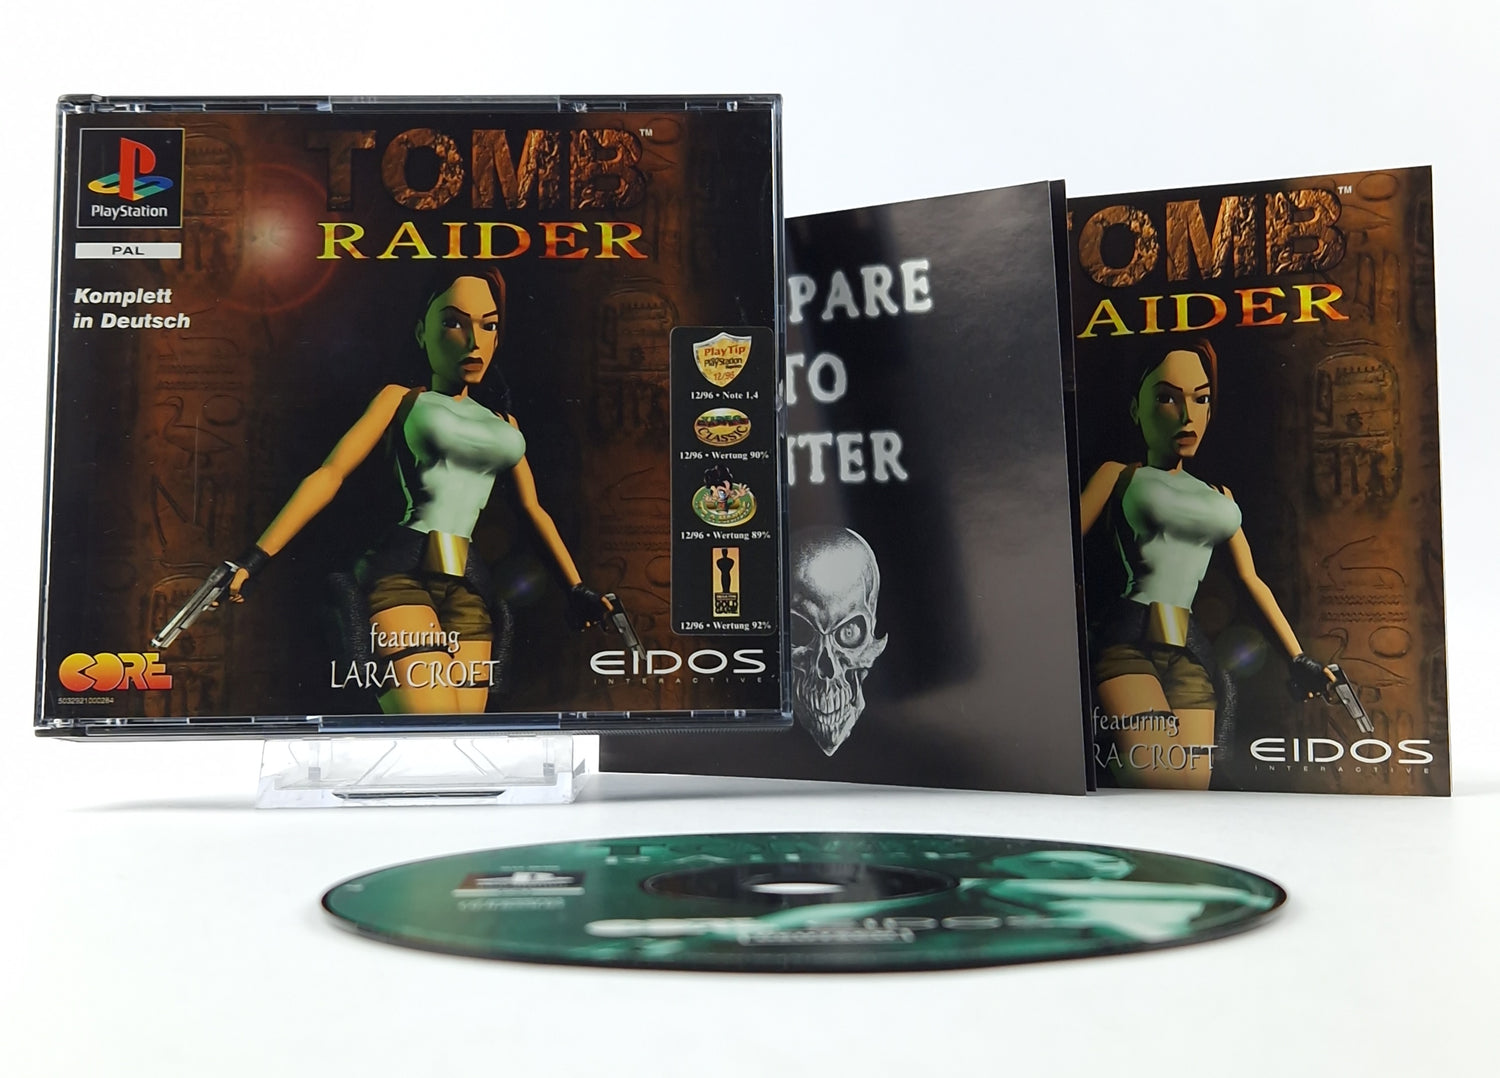 Playstation 1 game: Tomb Raider featuring Lara Croft - OVP Double Case PS1 PSX